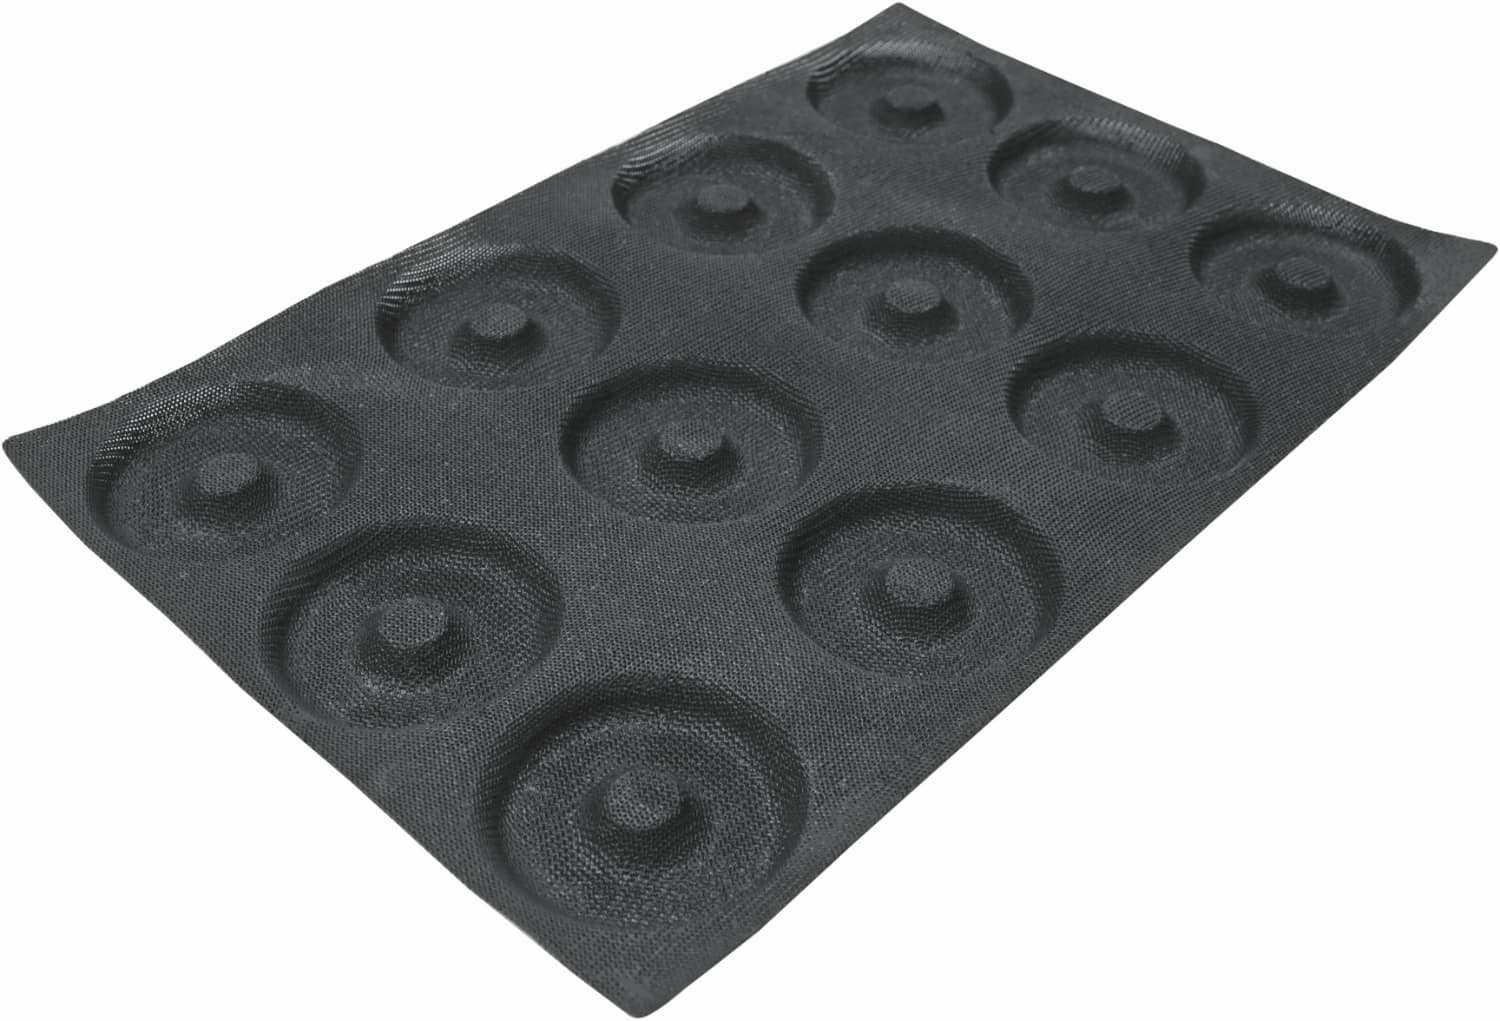 Baking mould AIR "Bagel" non-stick coated